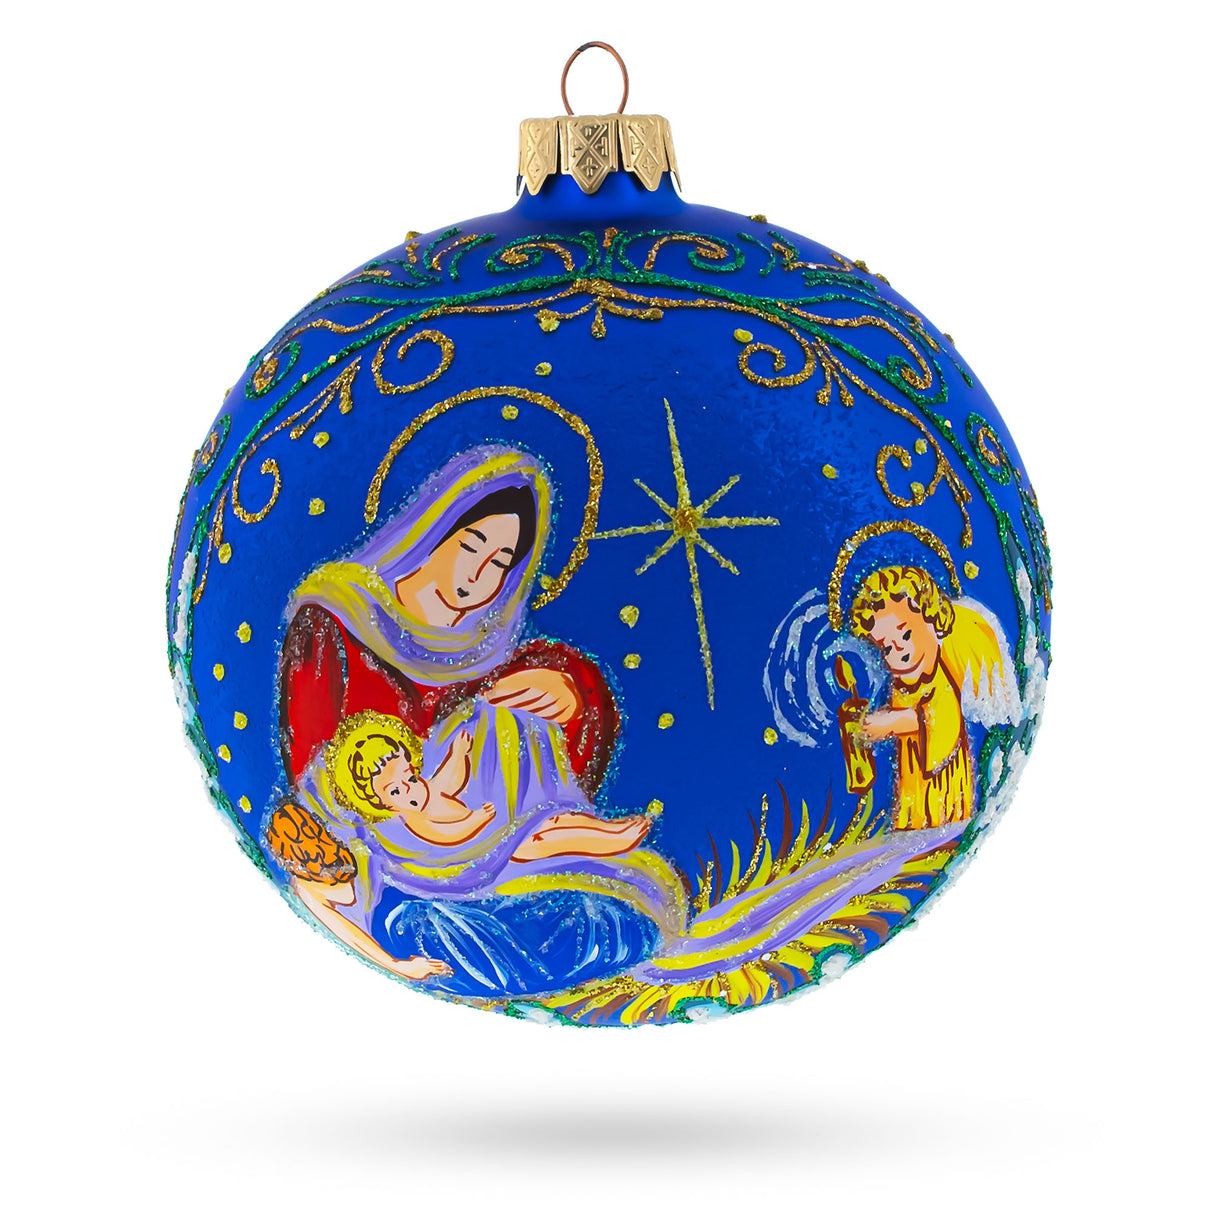 Glass Harmonious Angels Singing to Baby Jesus - Blown Glass Ball Christmas Ornament 4 Inches in Blue color Round